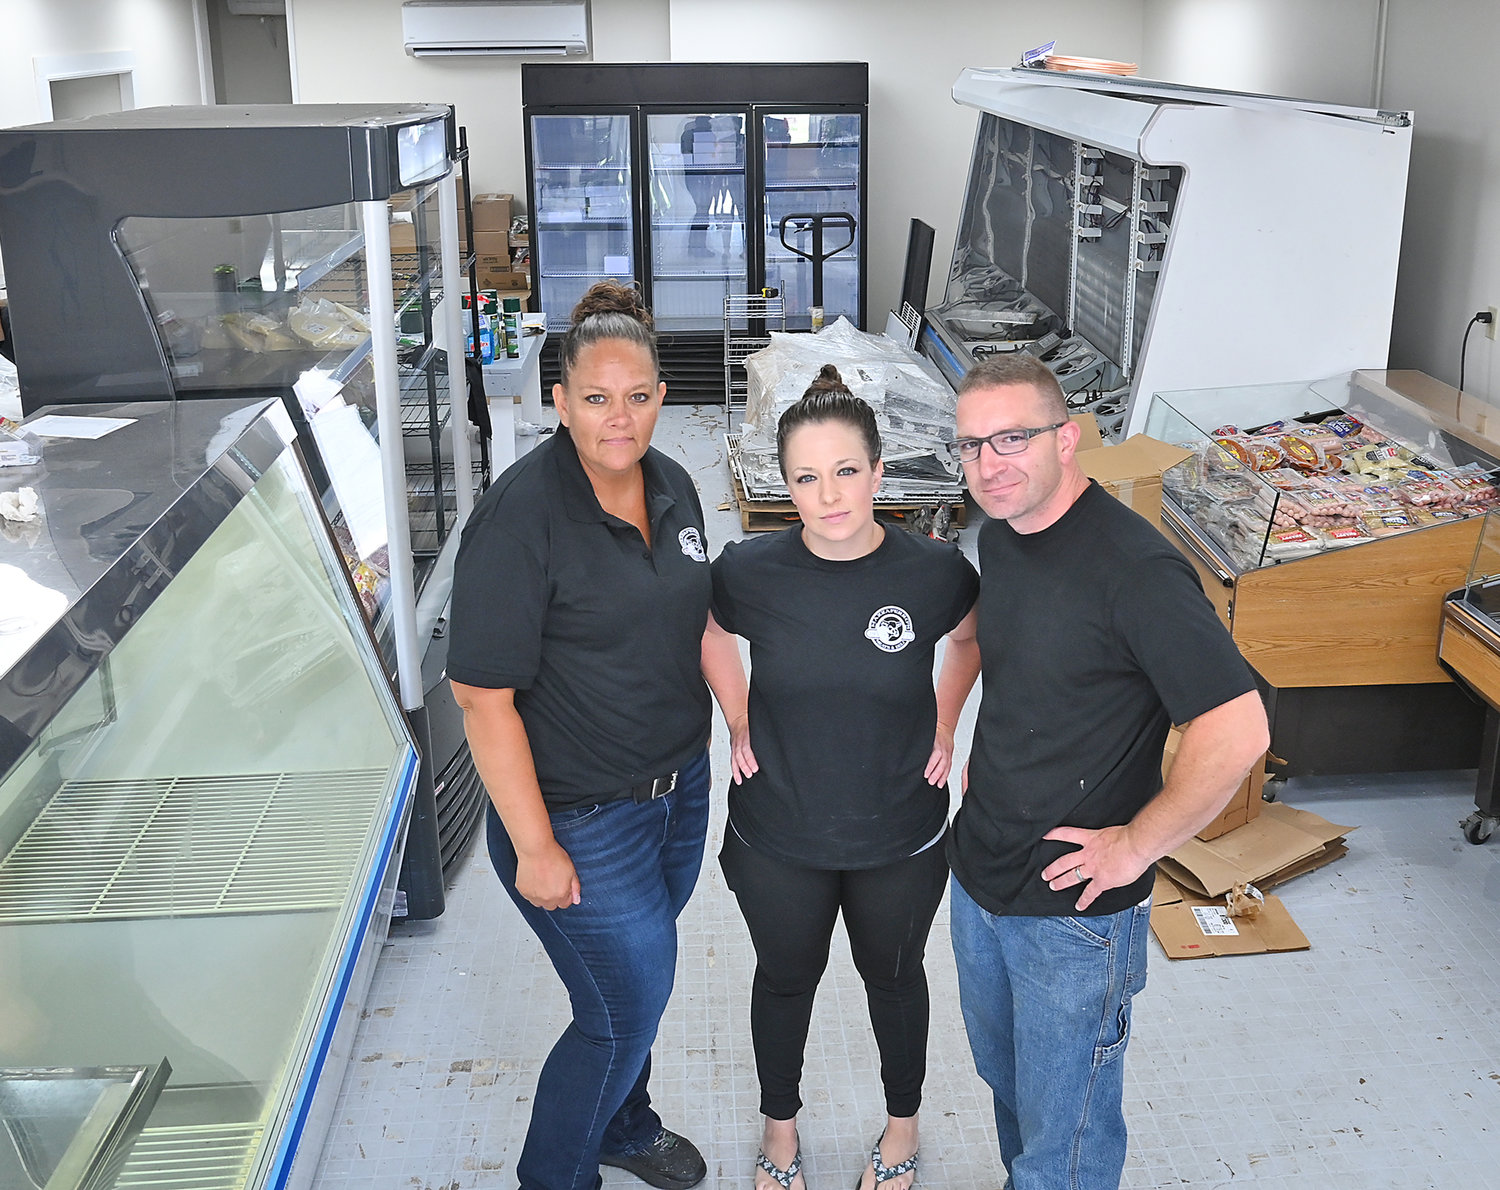 Mazzaferro’s Meats & Deli will open a satellite location on Railroad Street in Rome next week, featuring the talents of, from left, Missy Roberts, cook; Sabrina Davis, manager; and Brandon Ferrare, butcher.